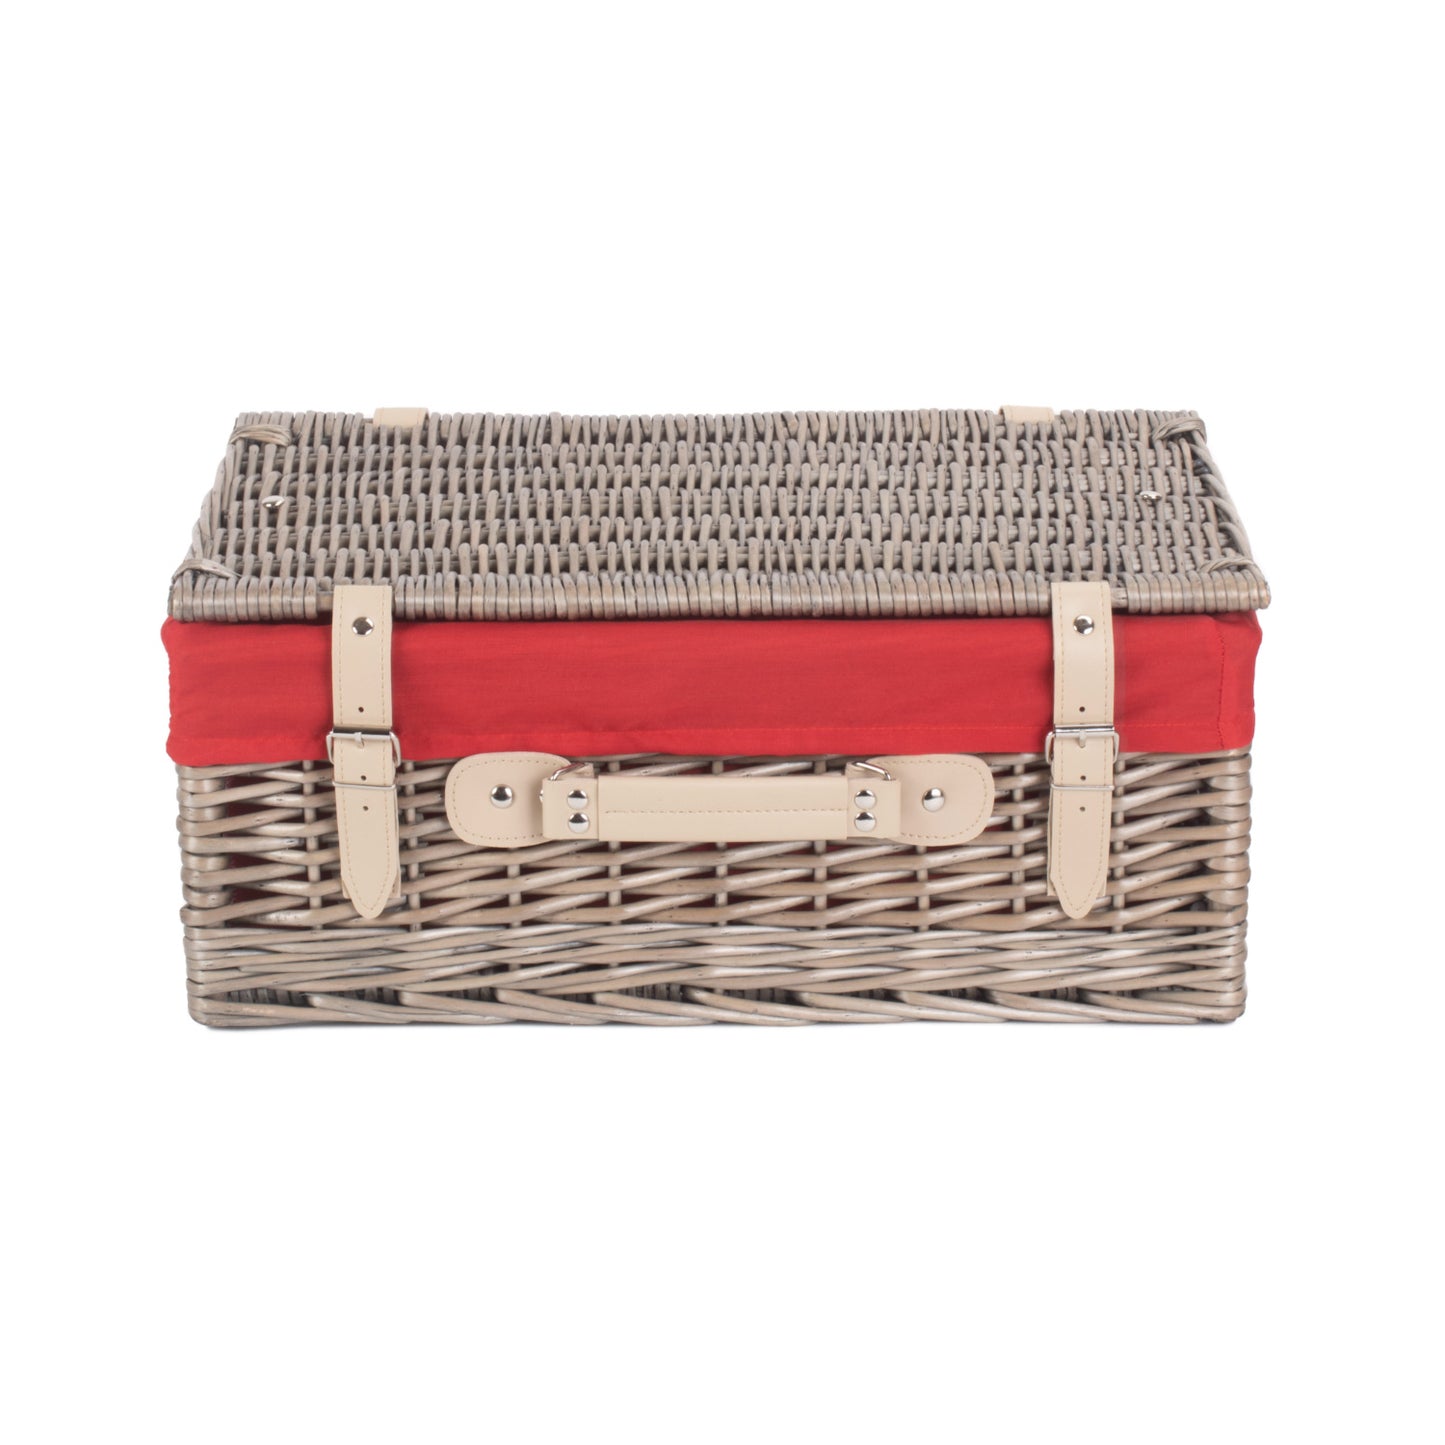 18 Inch Antique Wash Hamper With Red Lining